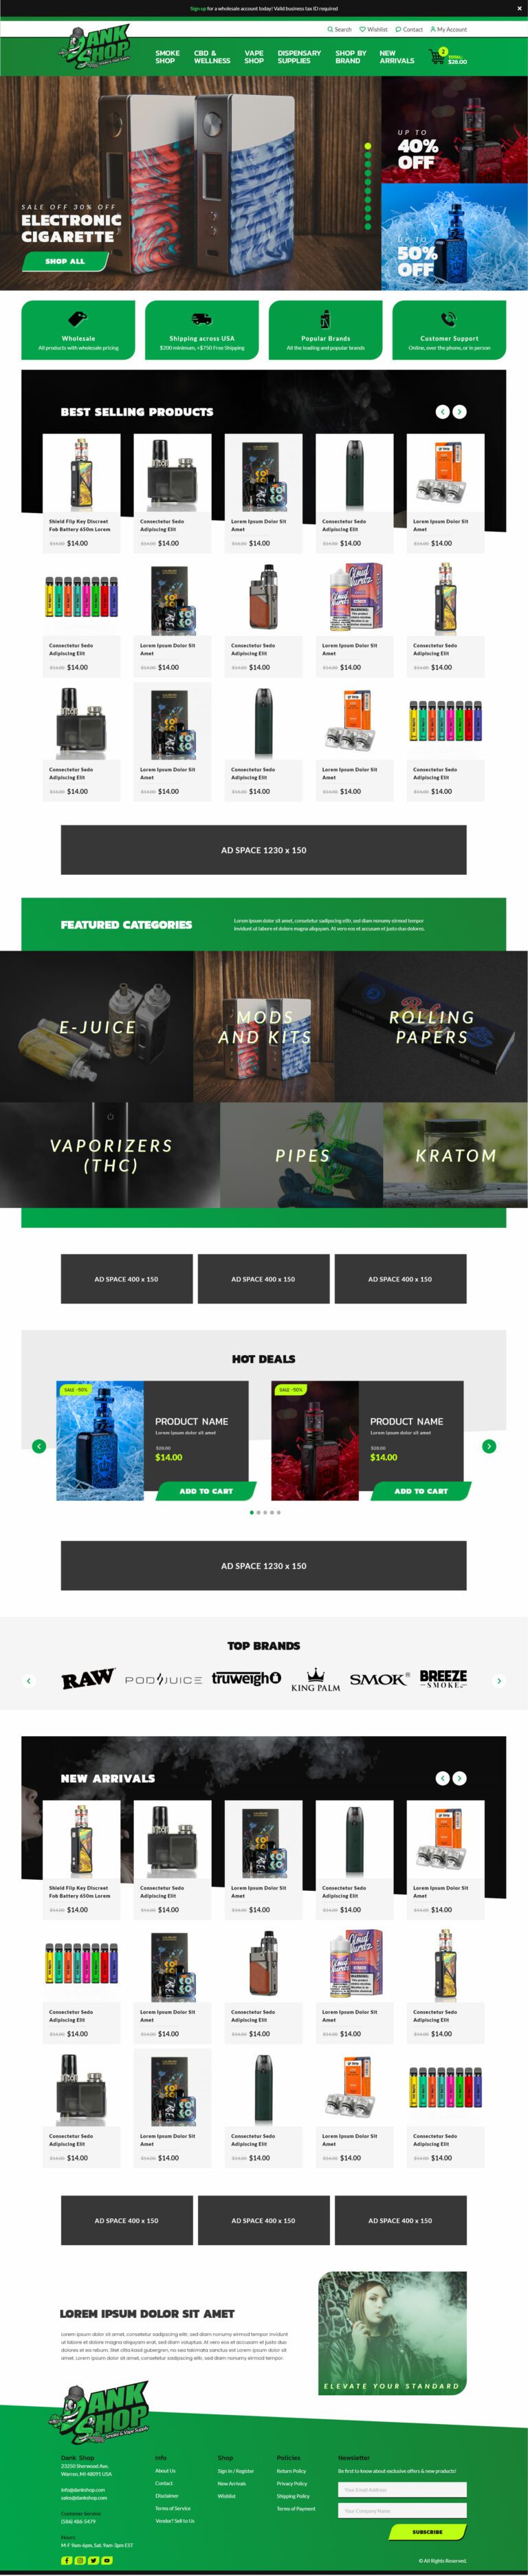 Home page showcasing some of Dank Shop’s smoke and vape products